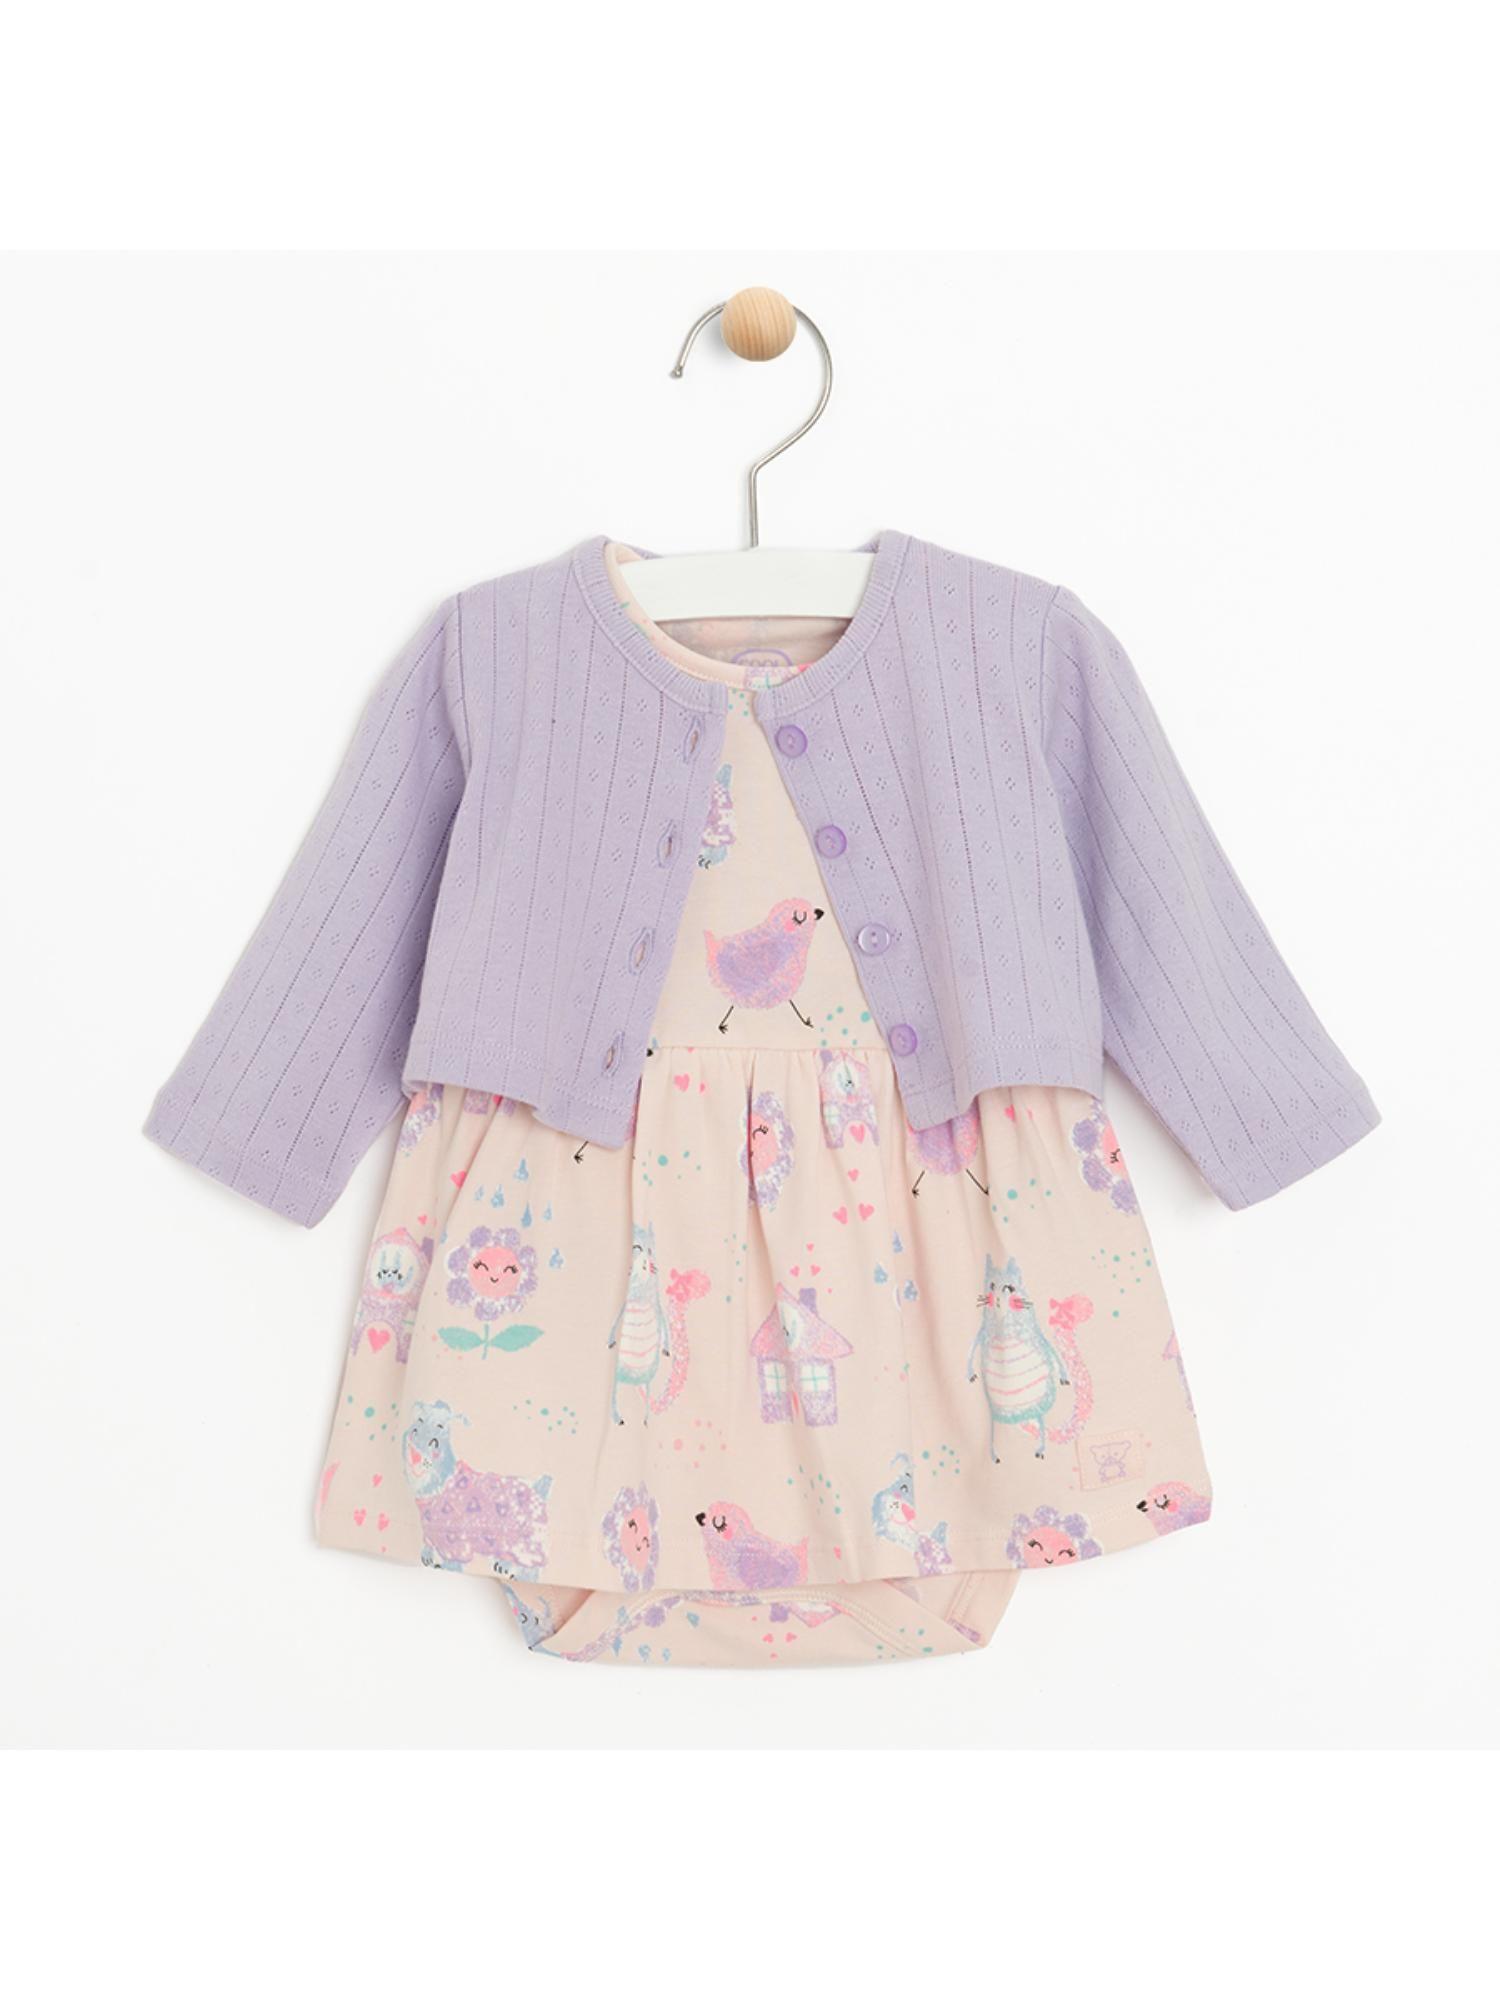 baby pink floral dress with lavender cardigan (set of 2)